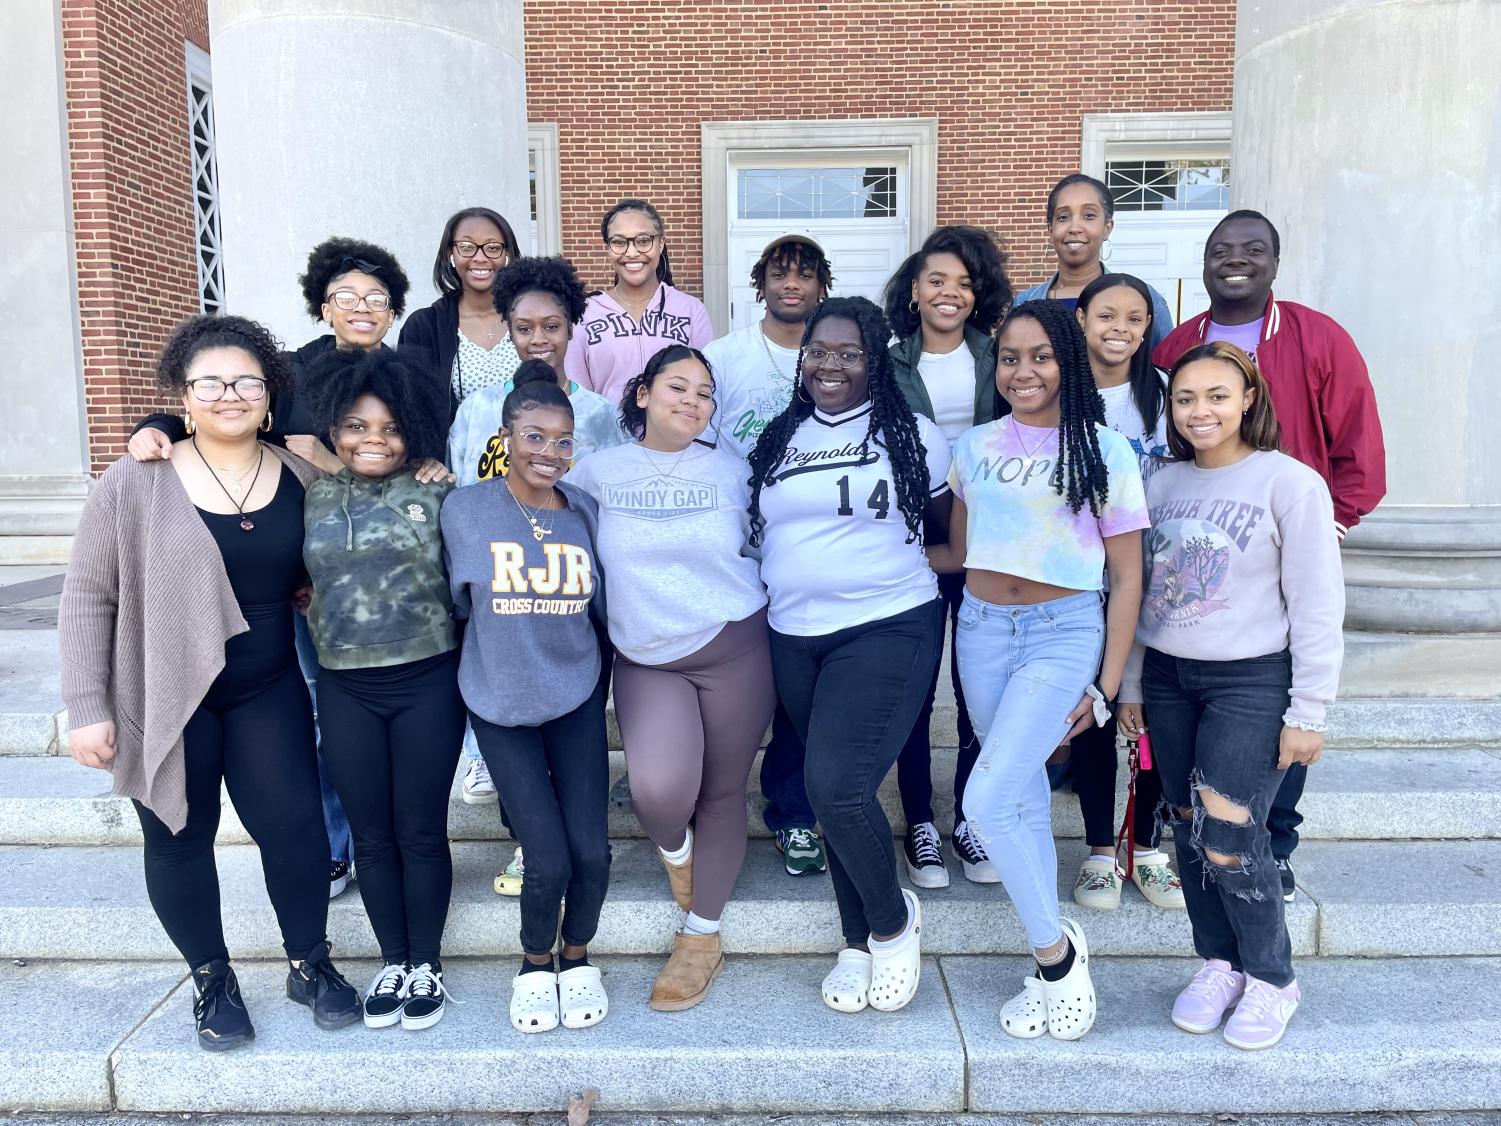 Ebony Society comes together on the steps of the Reynolds Auditorium.